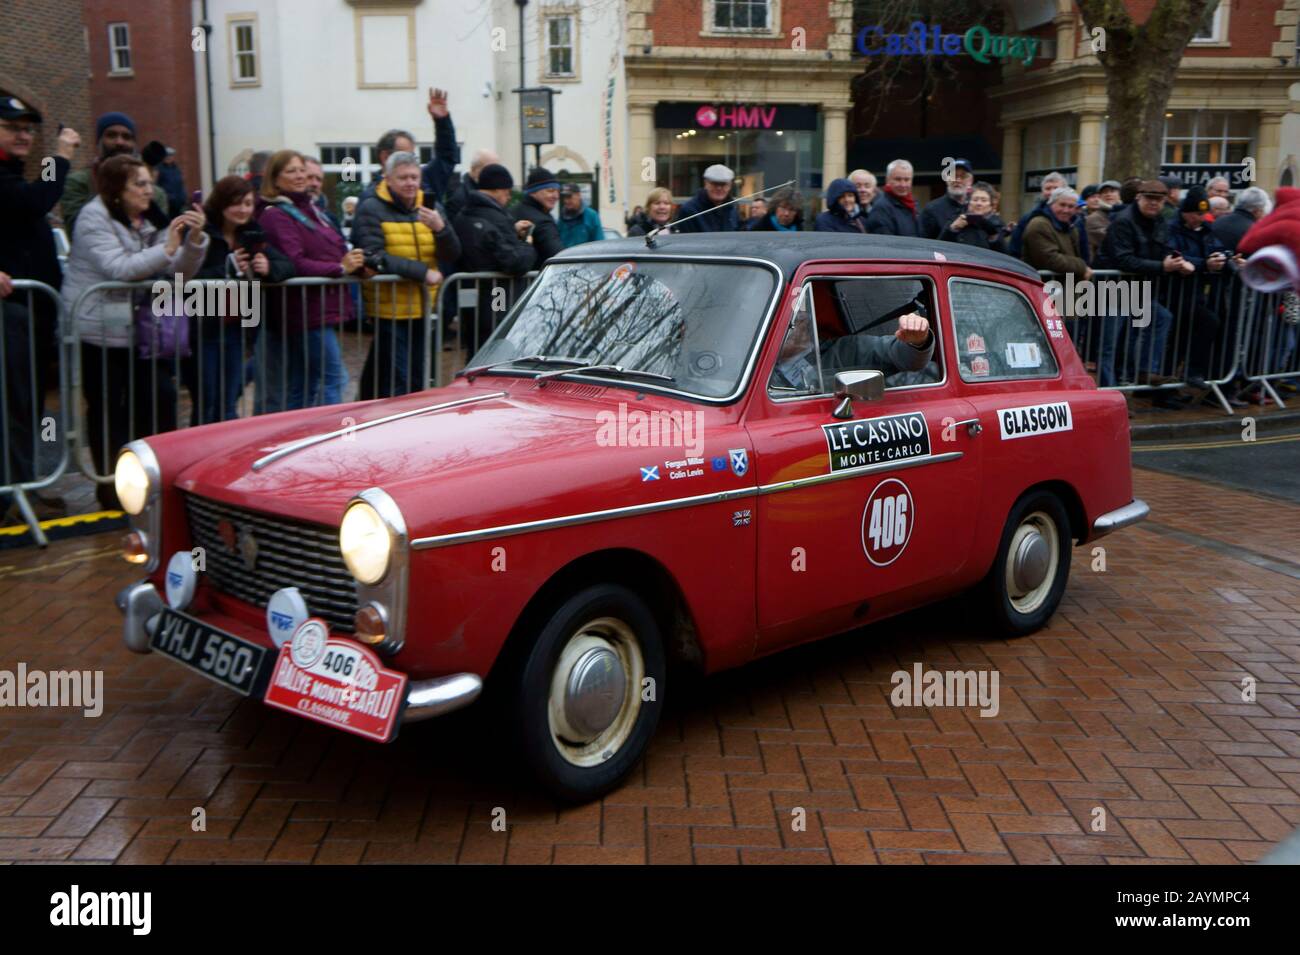 Car Number 406 leaving Passage Control in Banbury at the Rallye Monte-Carlo Historique Stock Photo